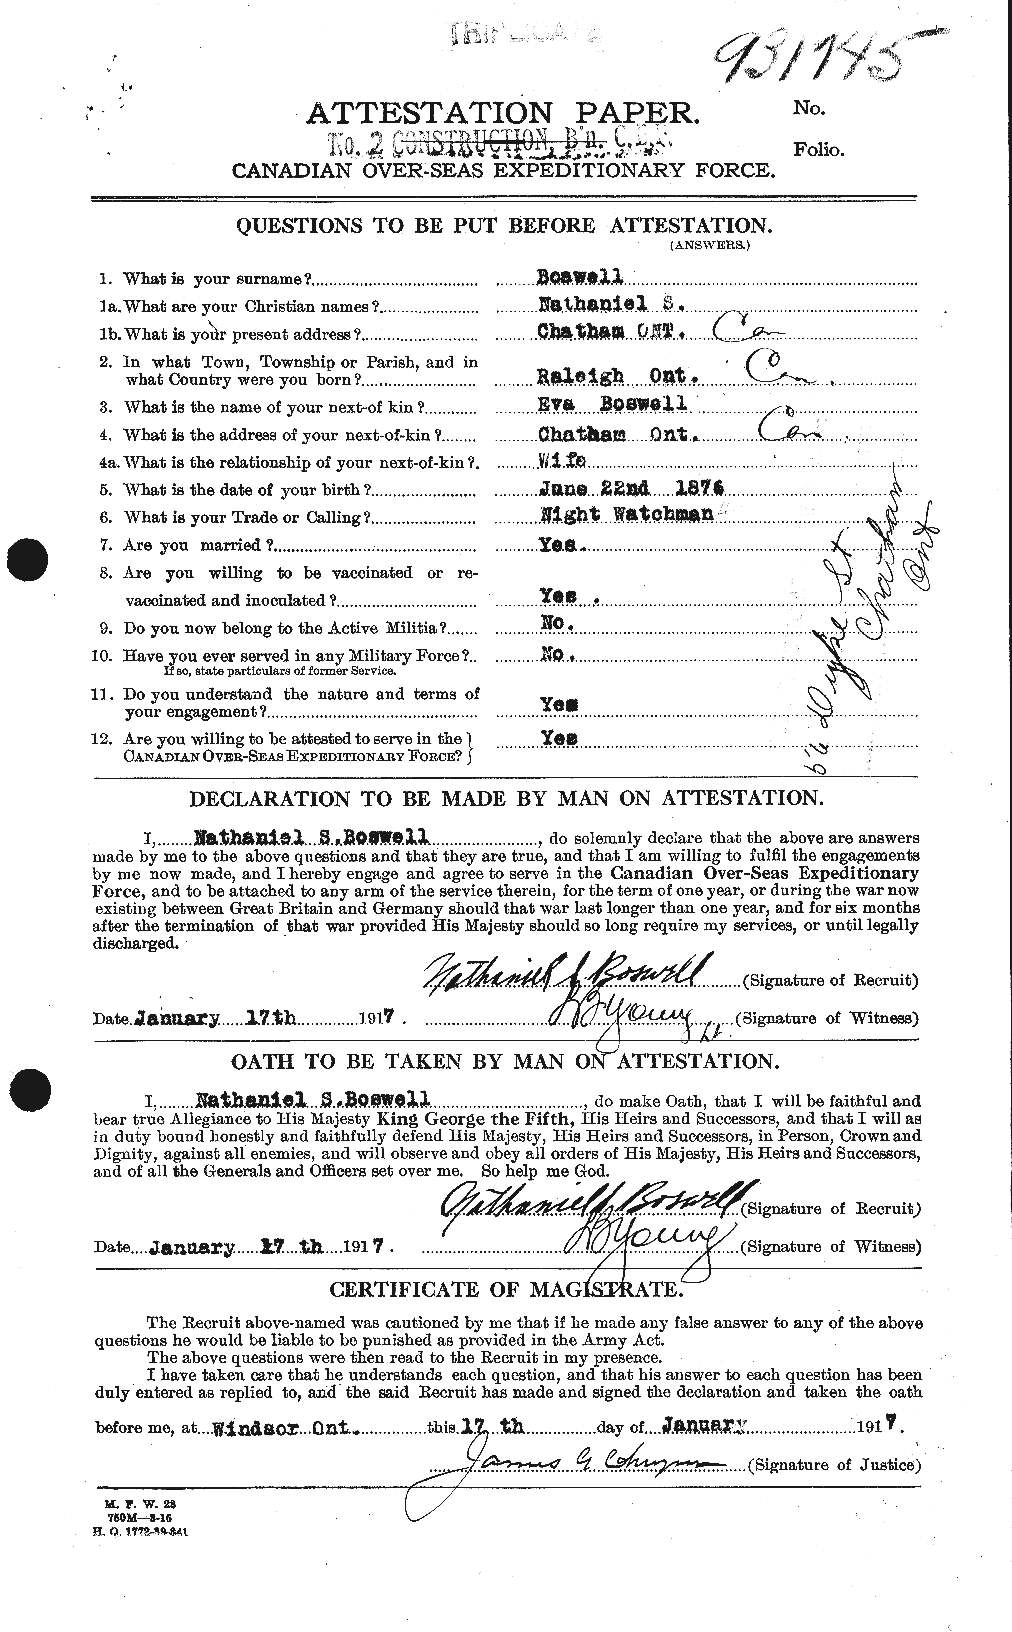 Personnel Records of the First World War - CEF 251950a